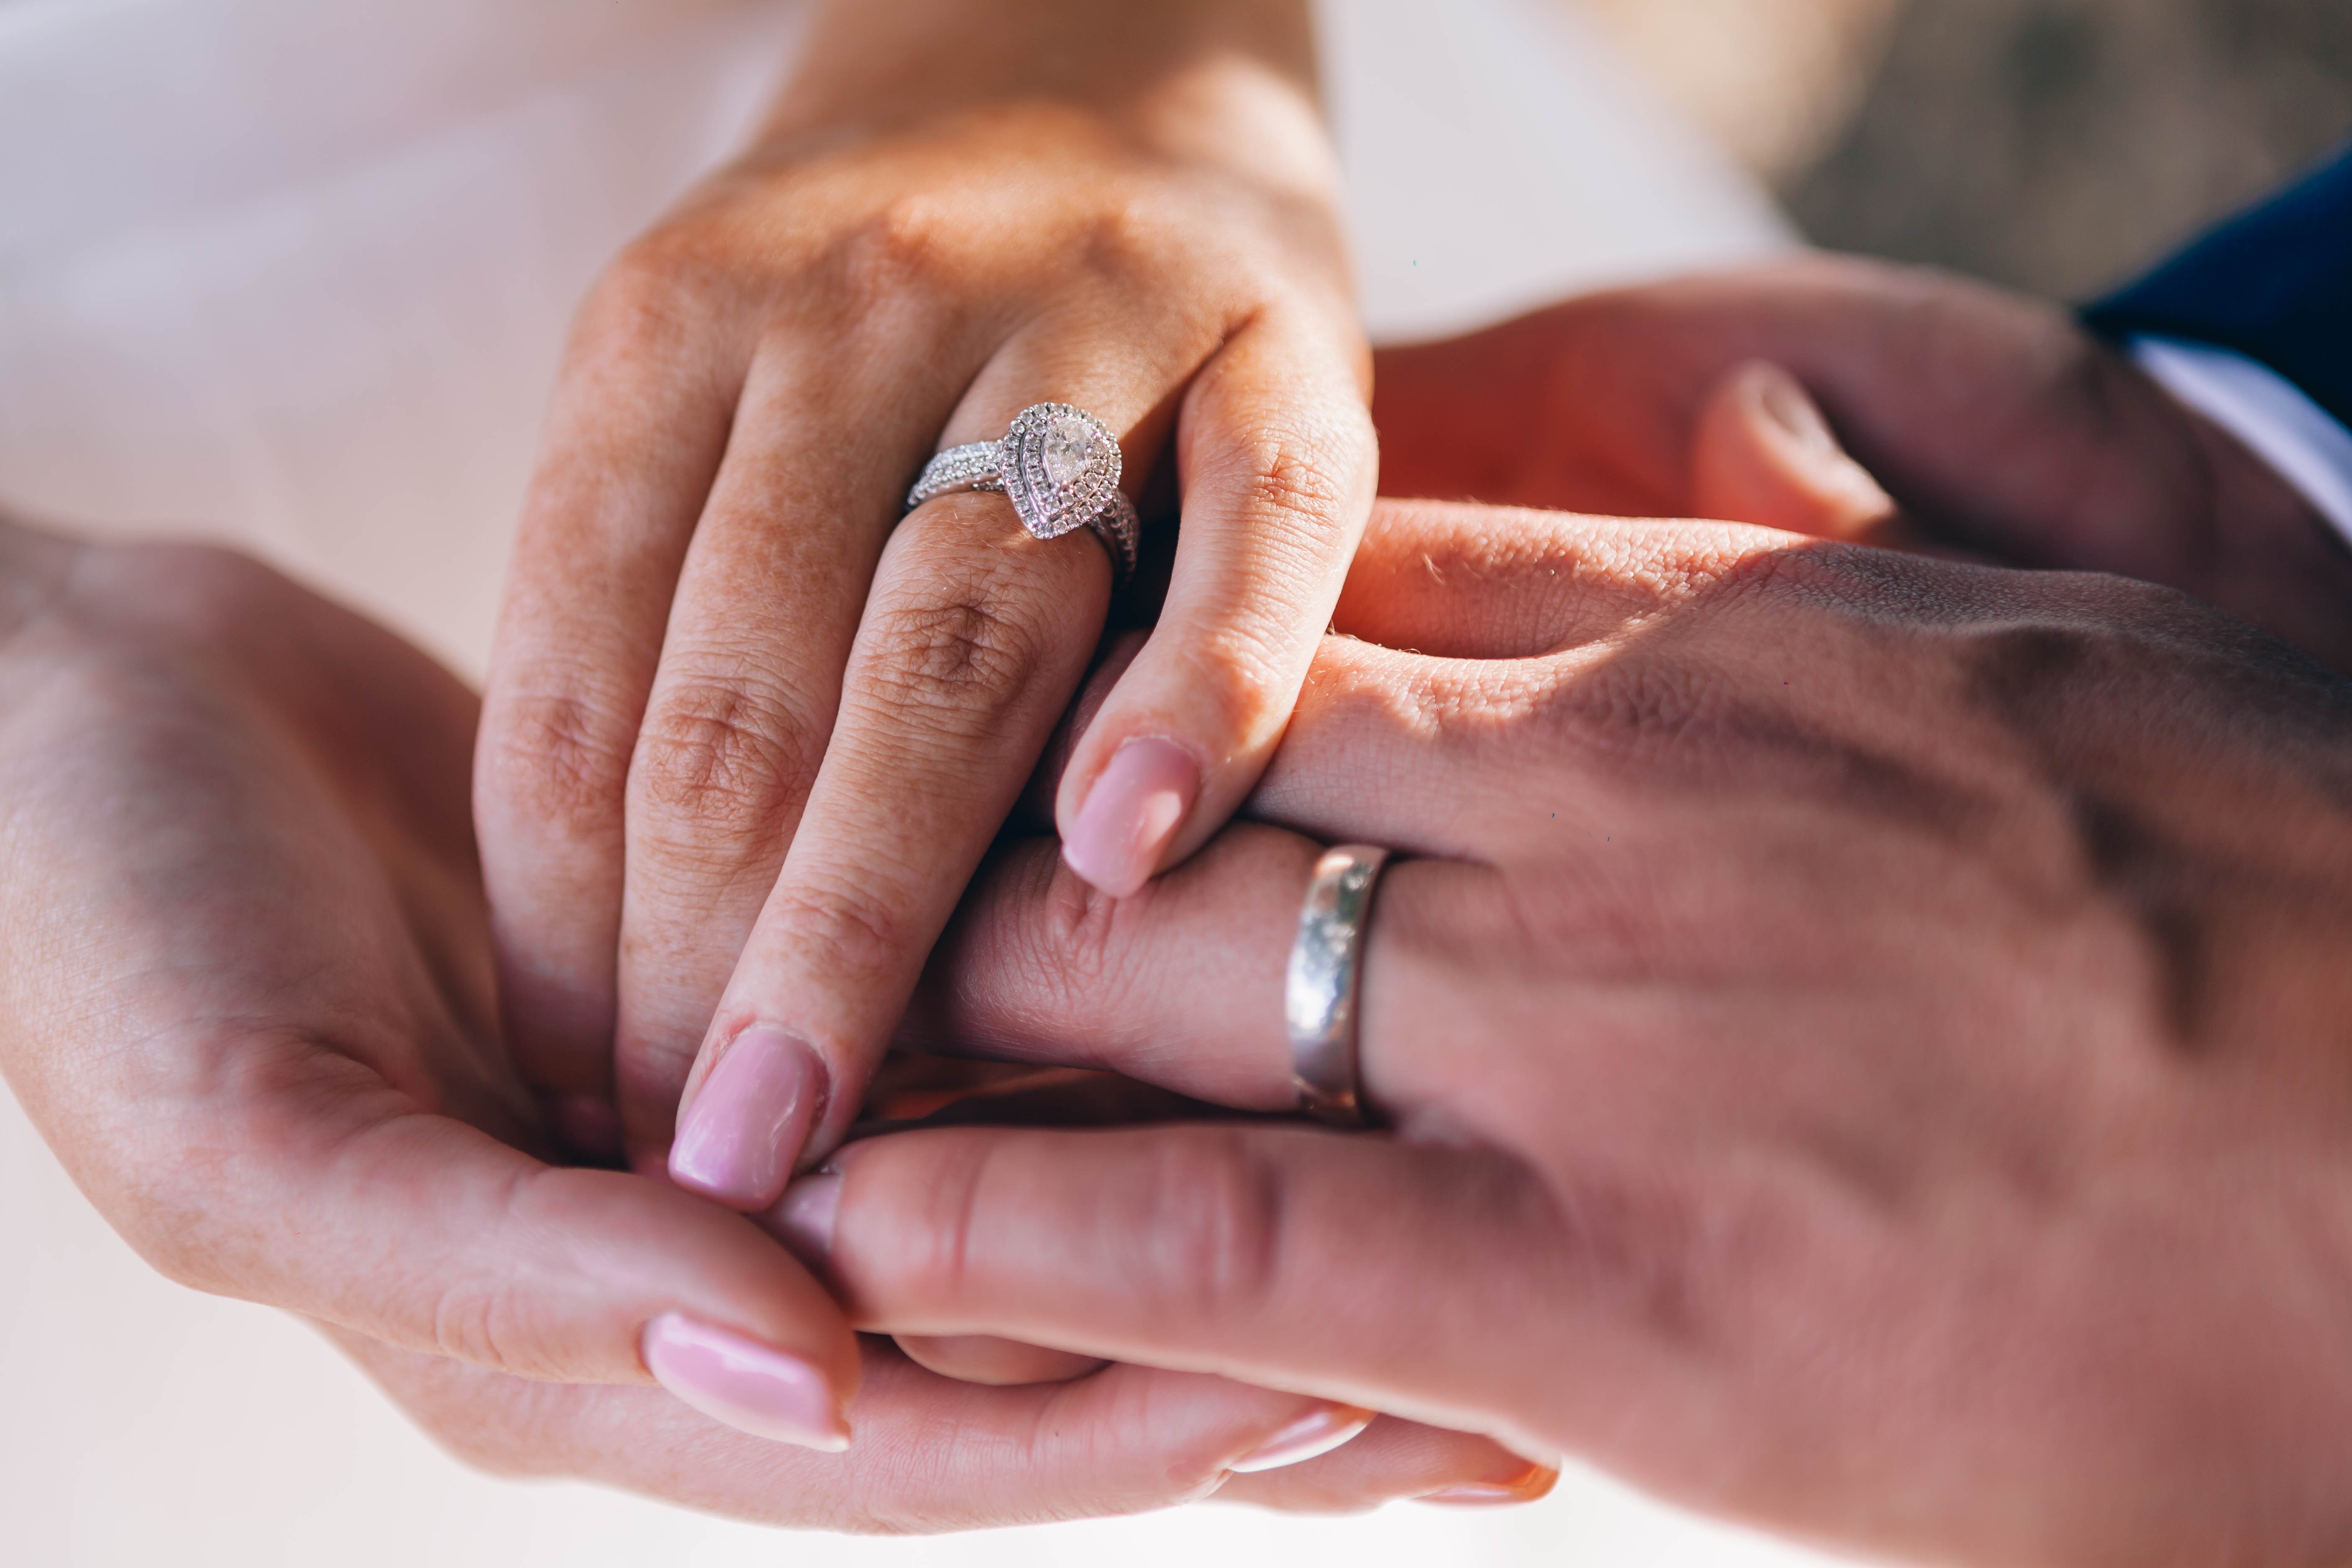 Couple showing their rings | Source: Pexels